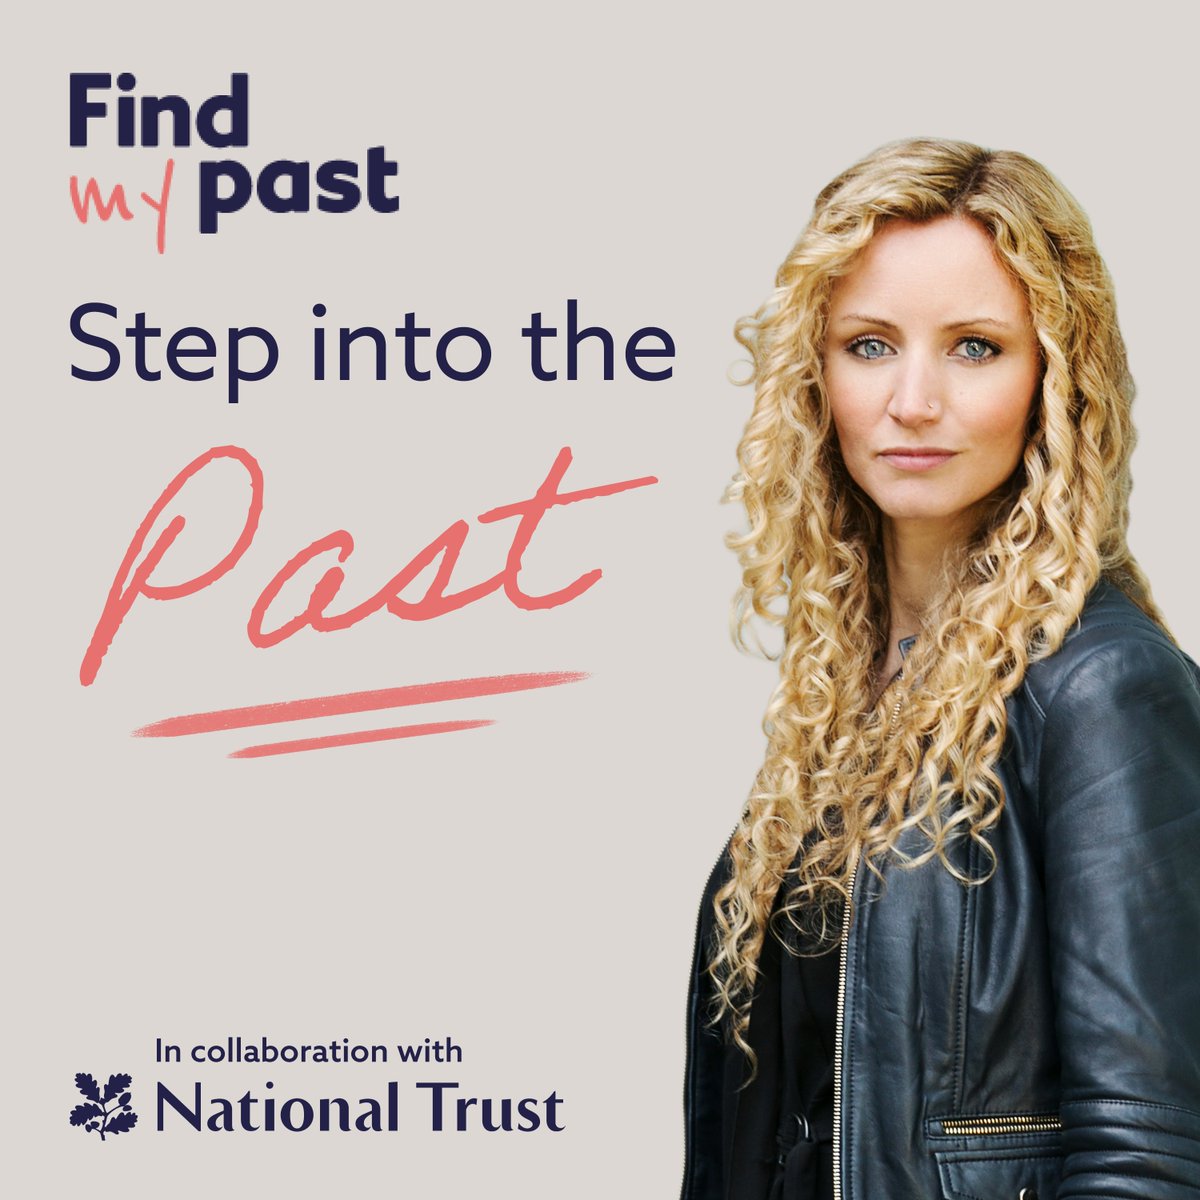 In episode 3 of our new podcast, @sixteenthCgirl meets Charlotte, the 4x great-granddaughter of poet William Wordsworth. Exploring @WordsworthNT, they retrace the steps of Charlotte's ancestors. Episode three: The wonders of Wordsworth House 🔉 bit.ly/3ElmNzX